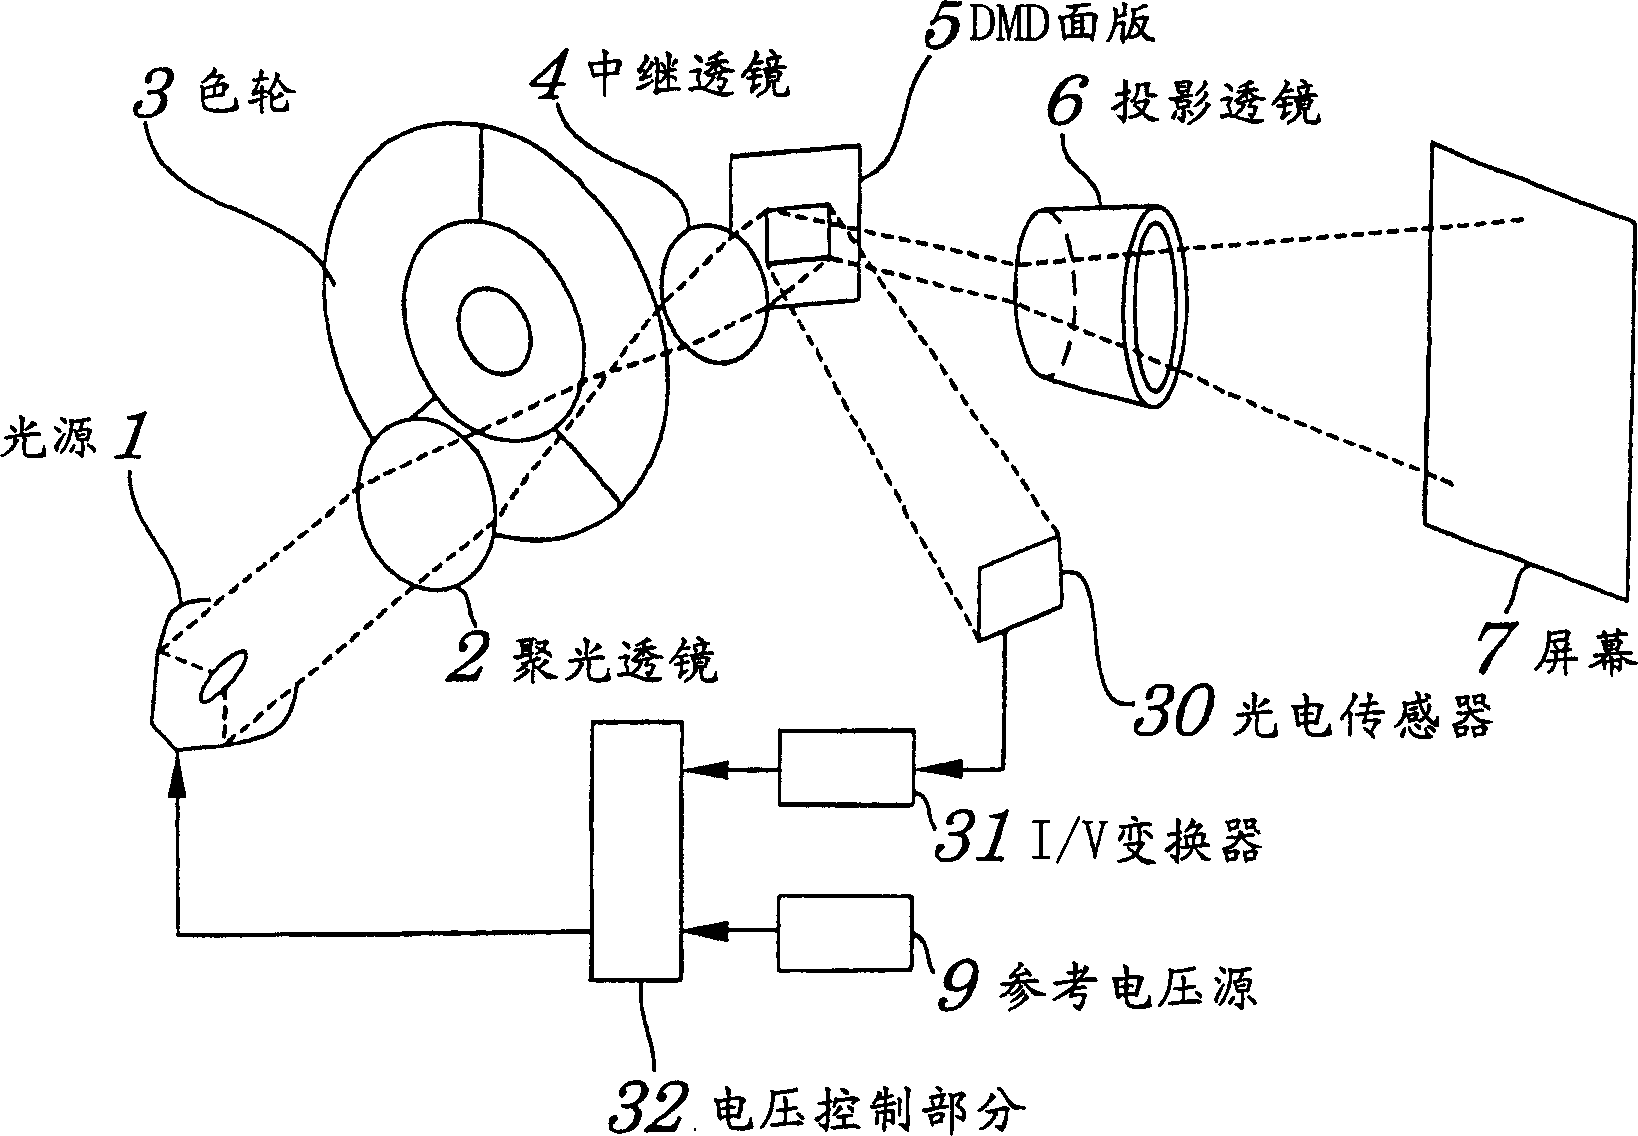 Digital mirror device projector and method of controlling amount of light being used in digital mirror device projector